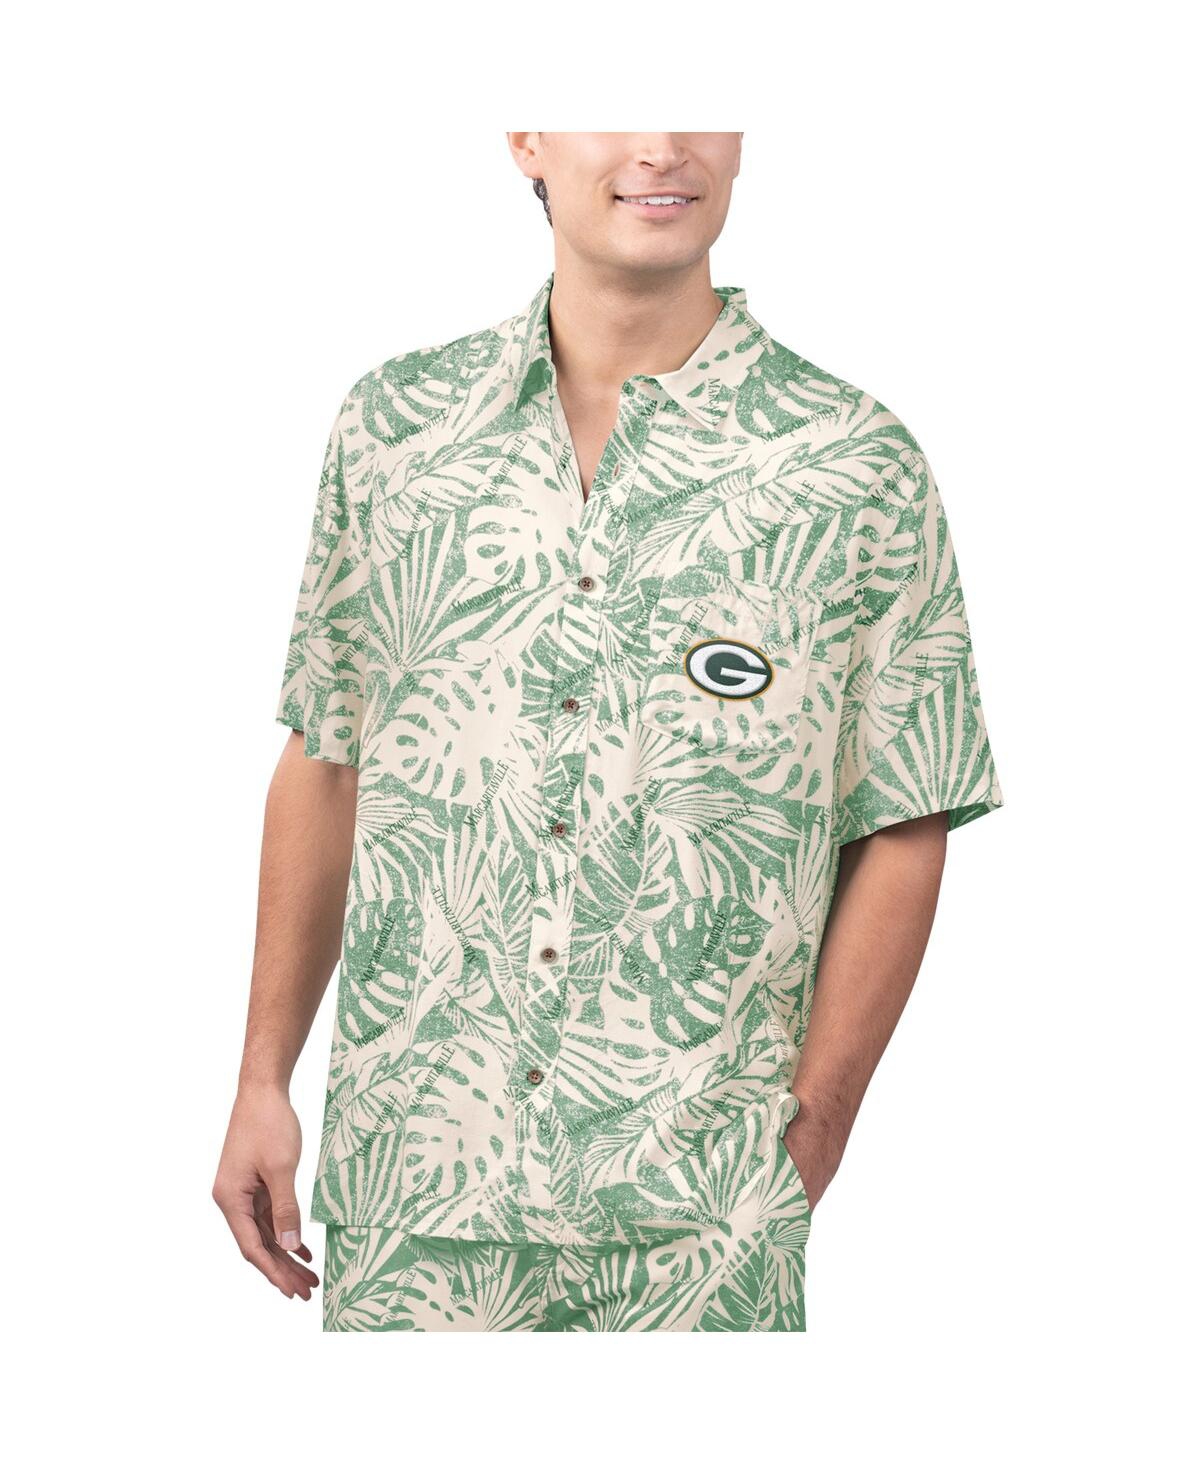 Men's Margaritaville Tan Green Bay Packers Sand Washed Monstera Print Party Button-Up Shirt - Tan